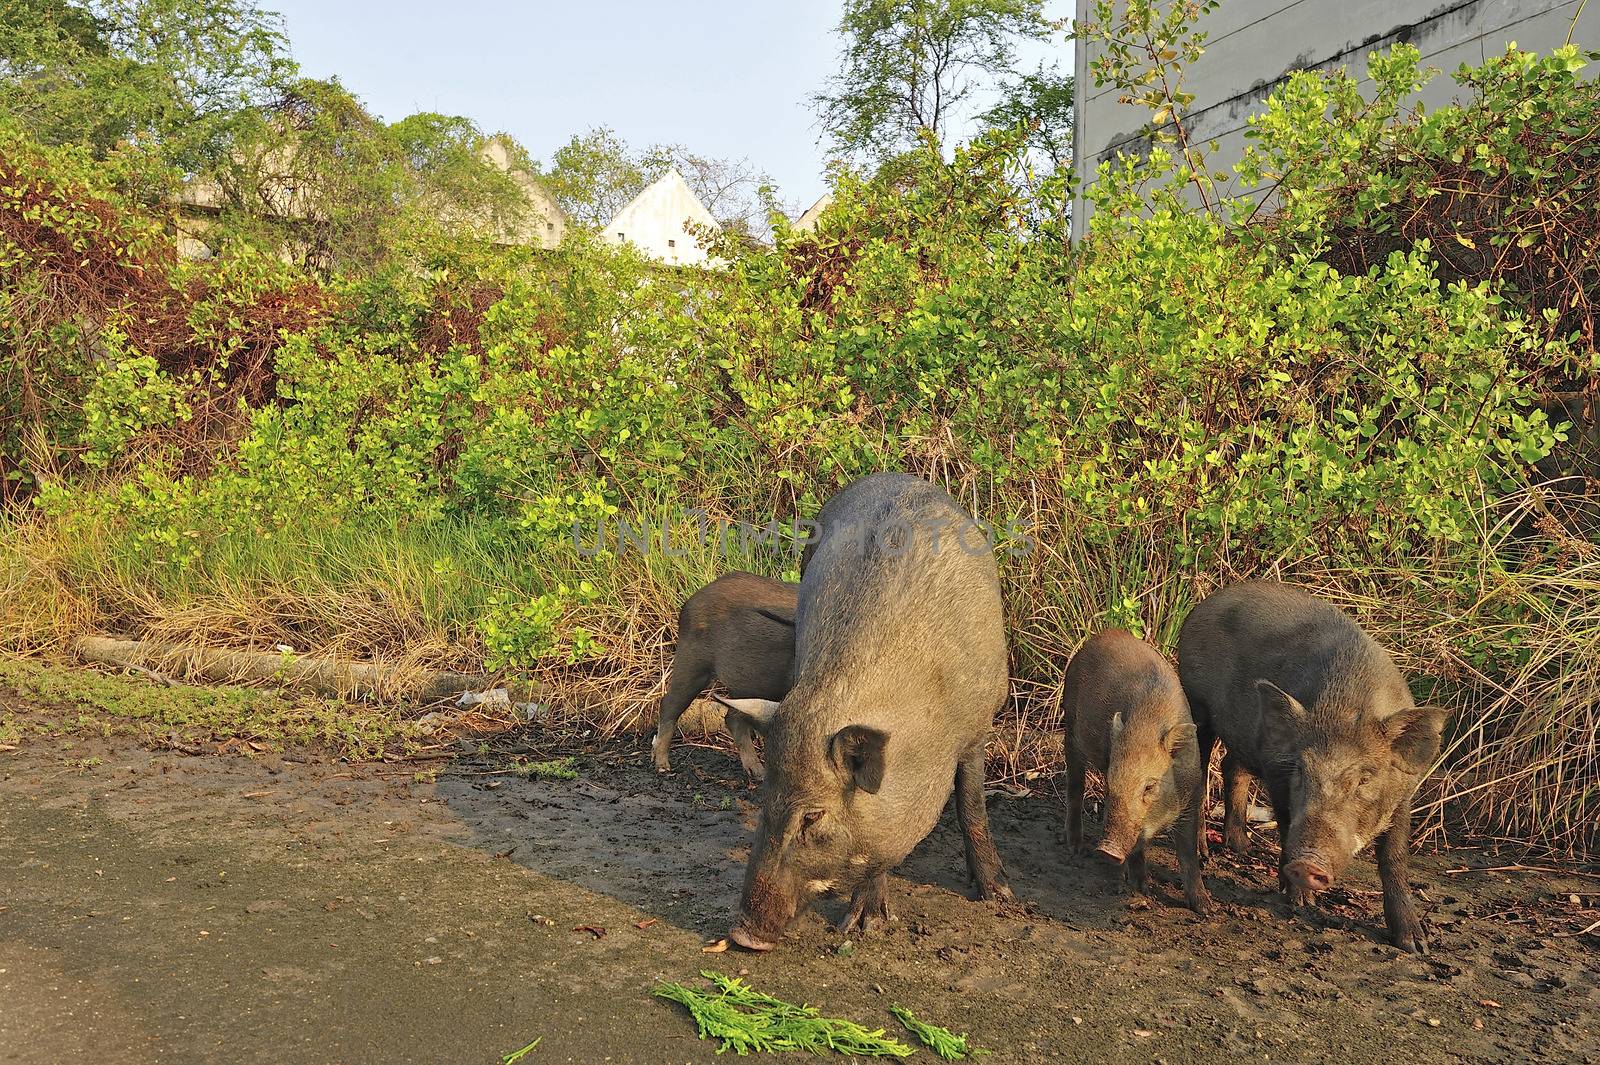 Wild pig family in abandon village by think4photop